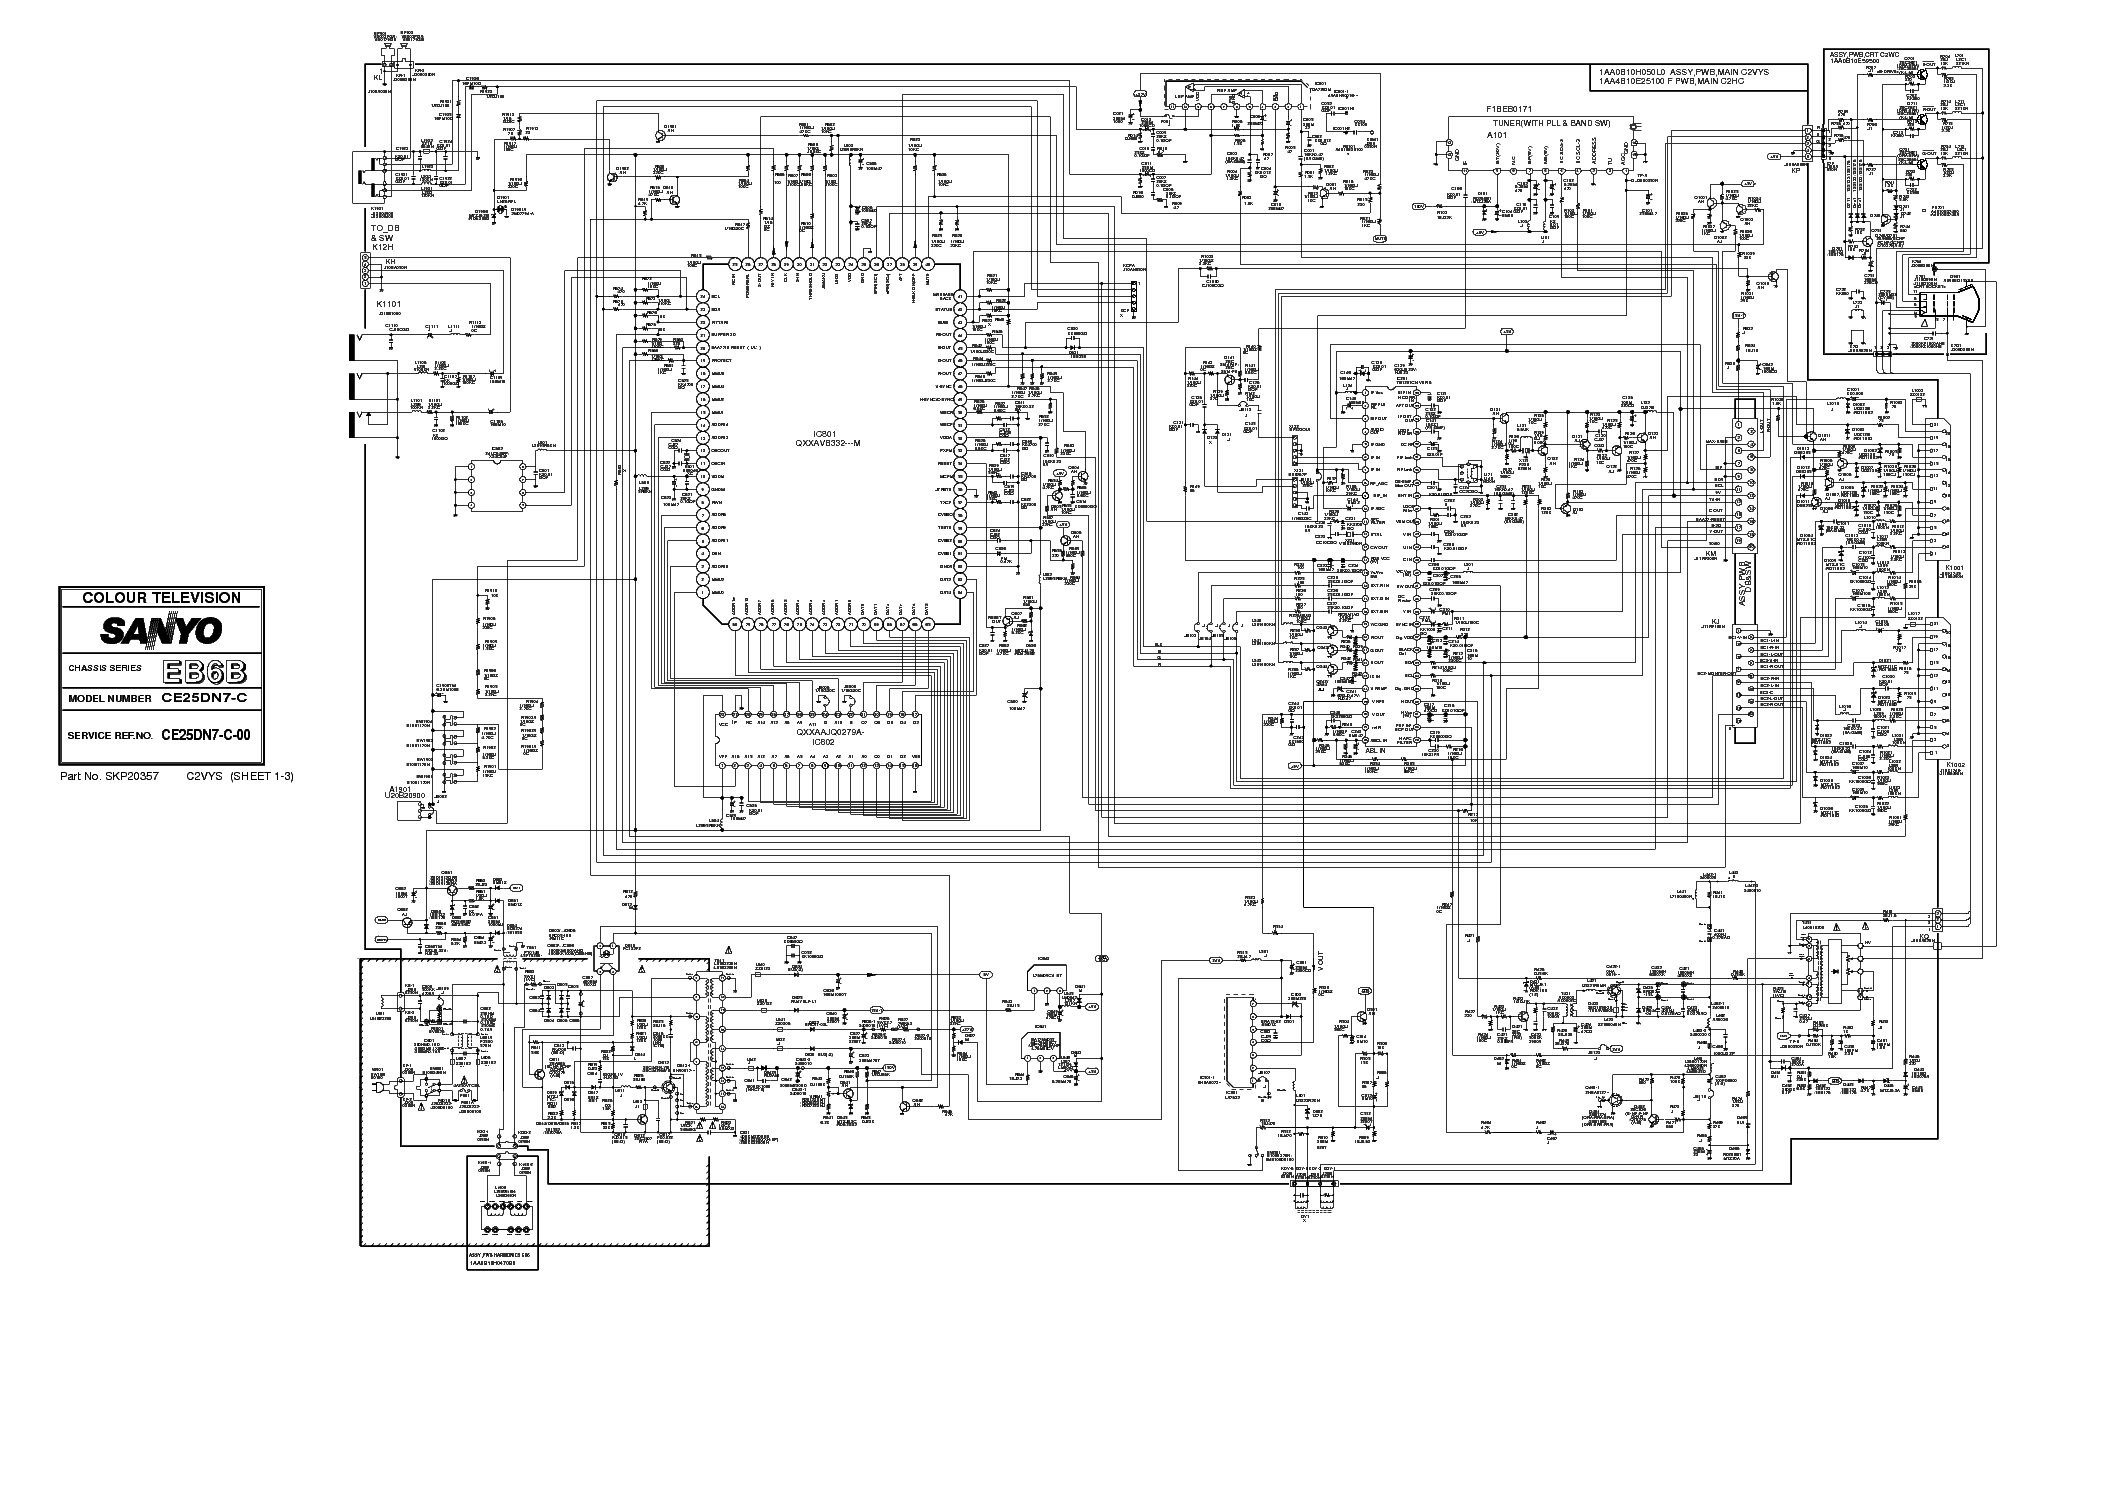 SANYO CHASSIS EB6-B CE25DN7-C service manual (1st page)